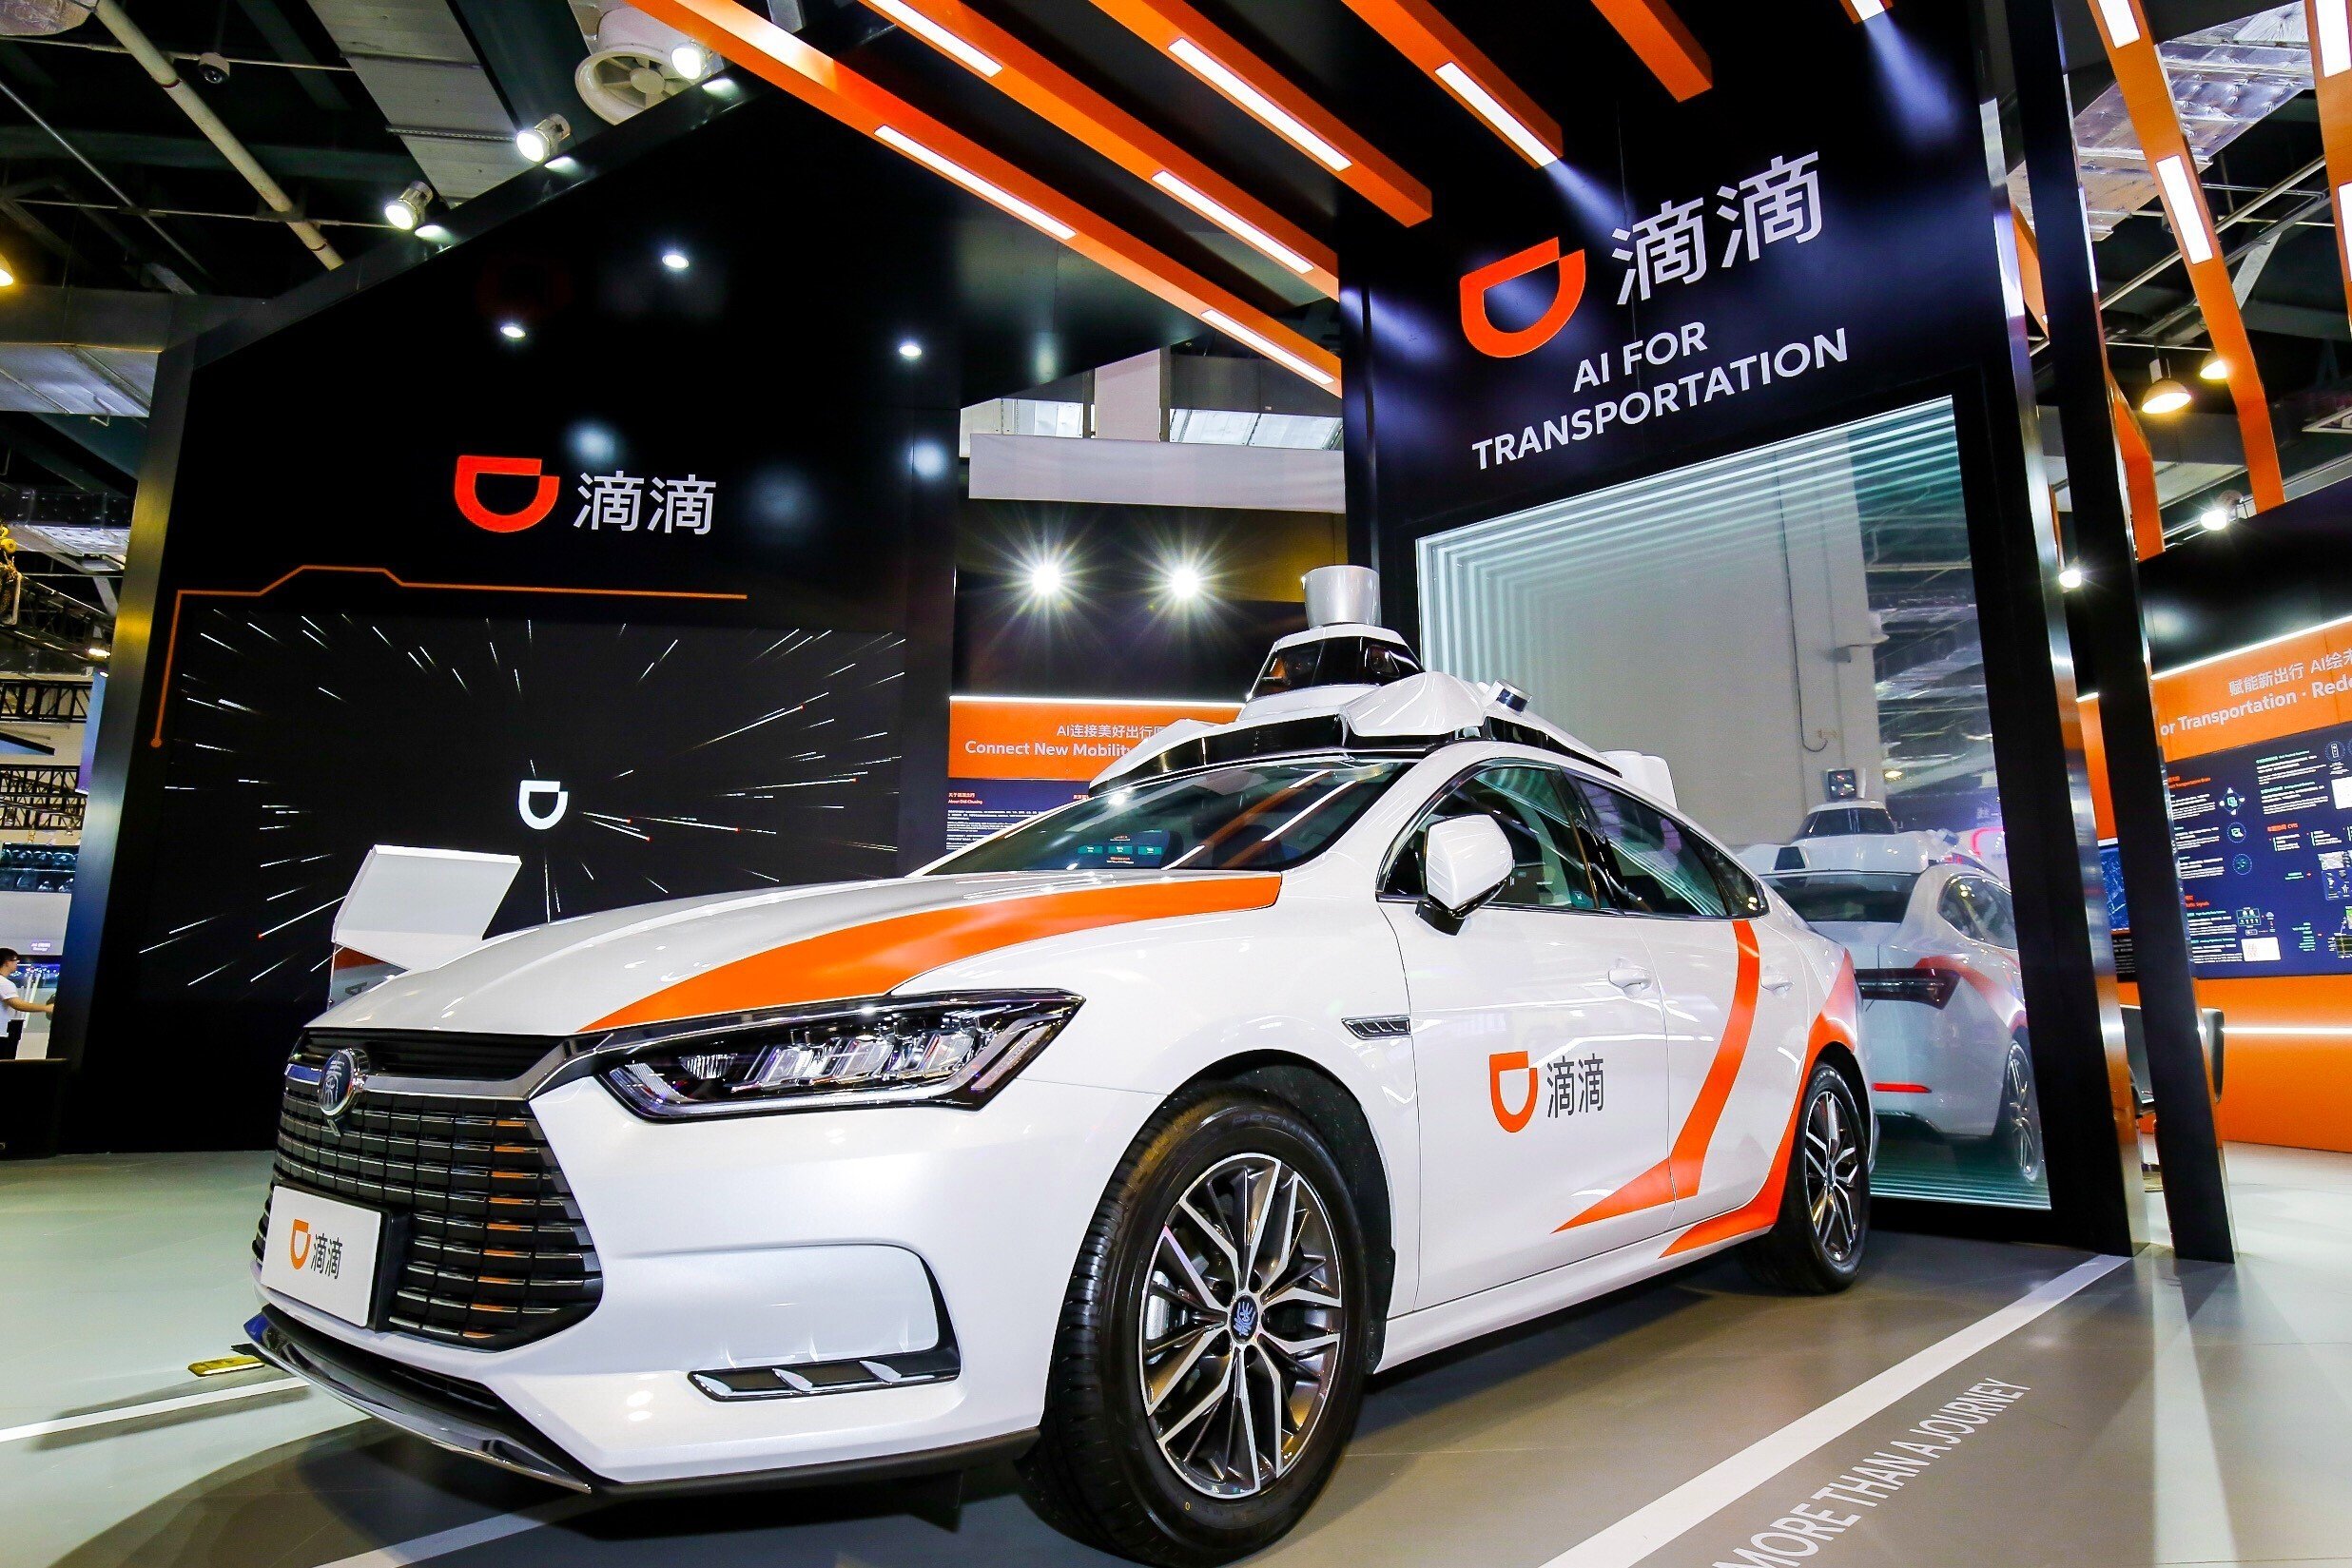 Didi Chuxing is conducting trials with self-driving vehicles in China and the US, where the ride-hailing giant has open-road testing permits. Photo: Handout